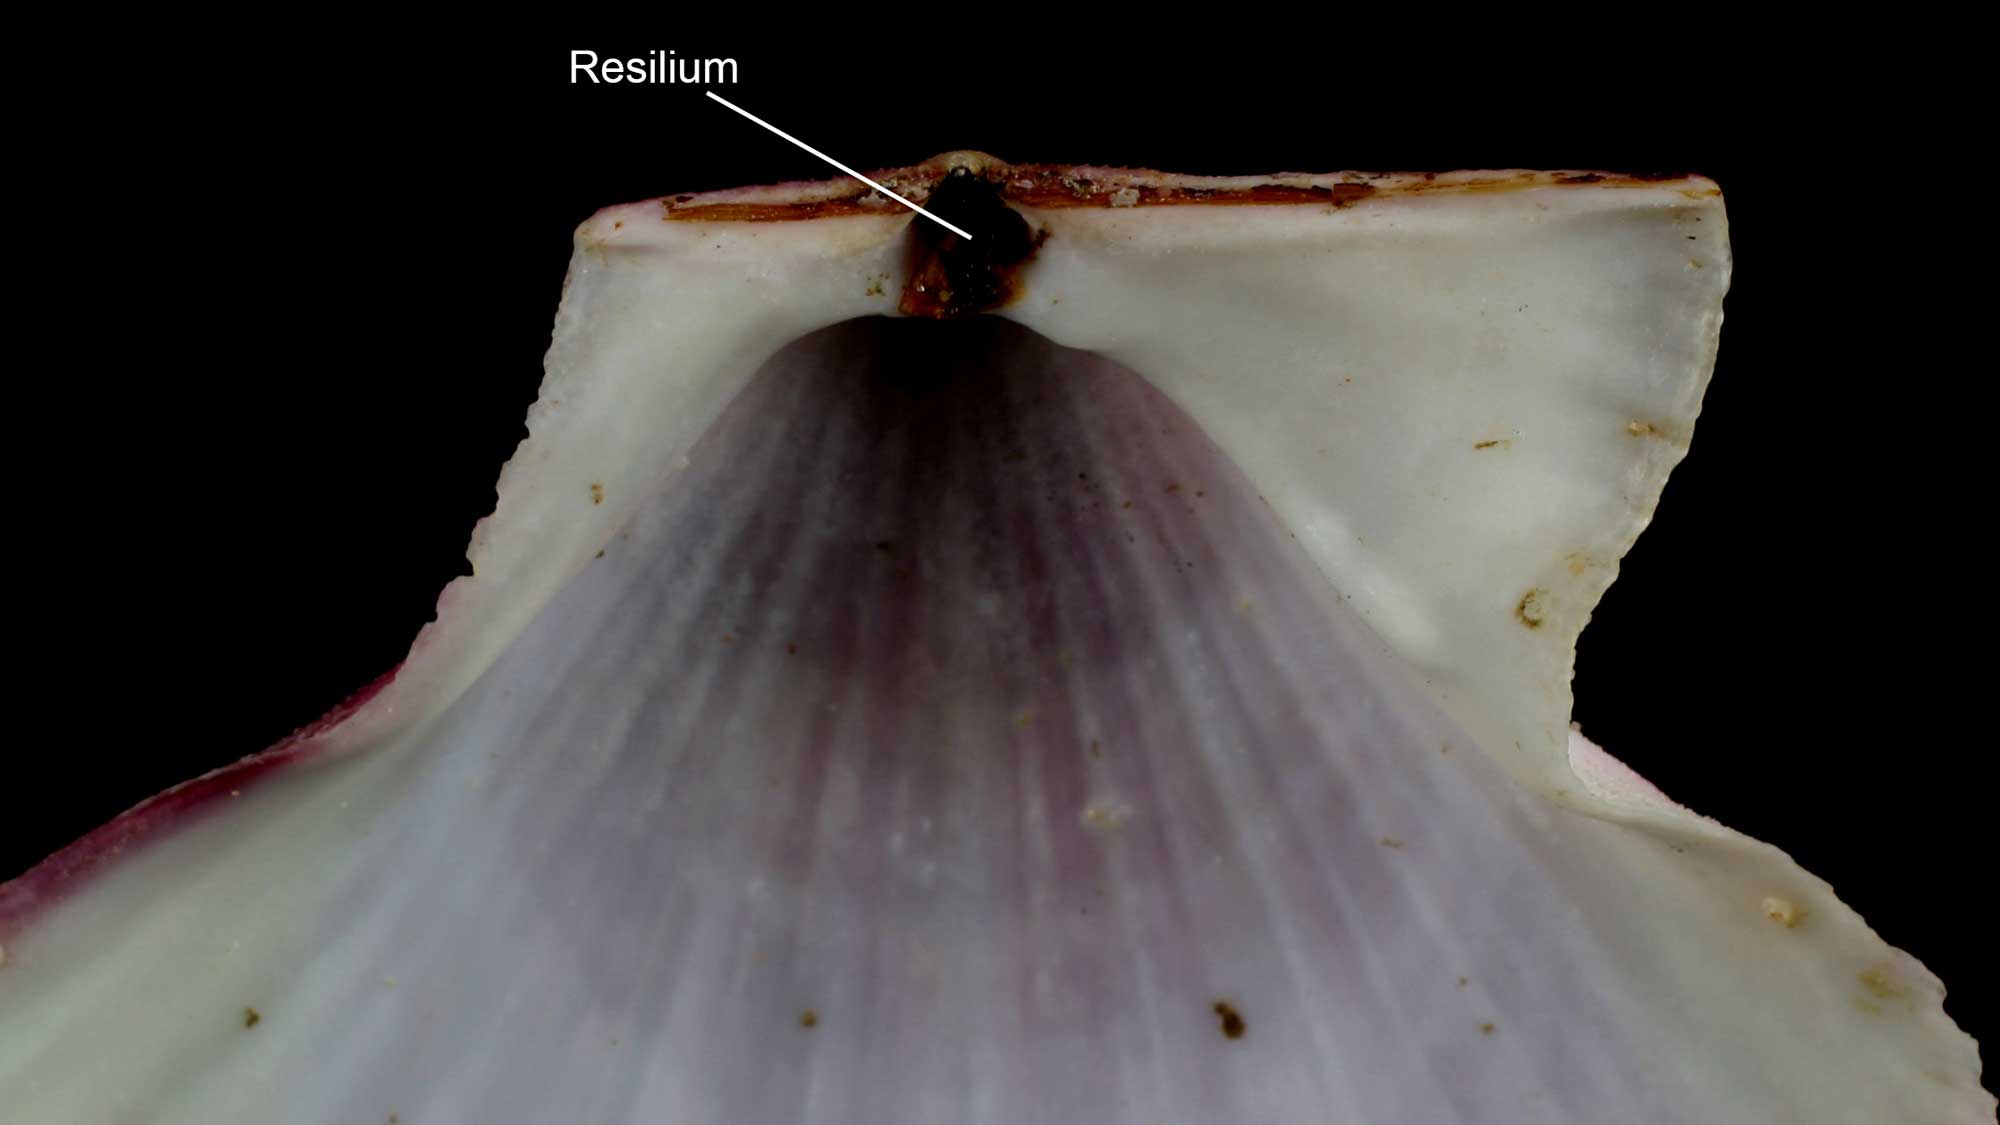 Photograph of a scallop shell with the resilium labeled.